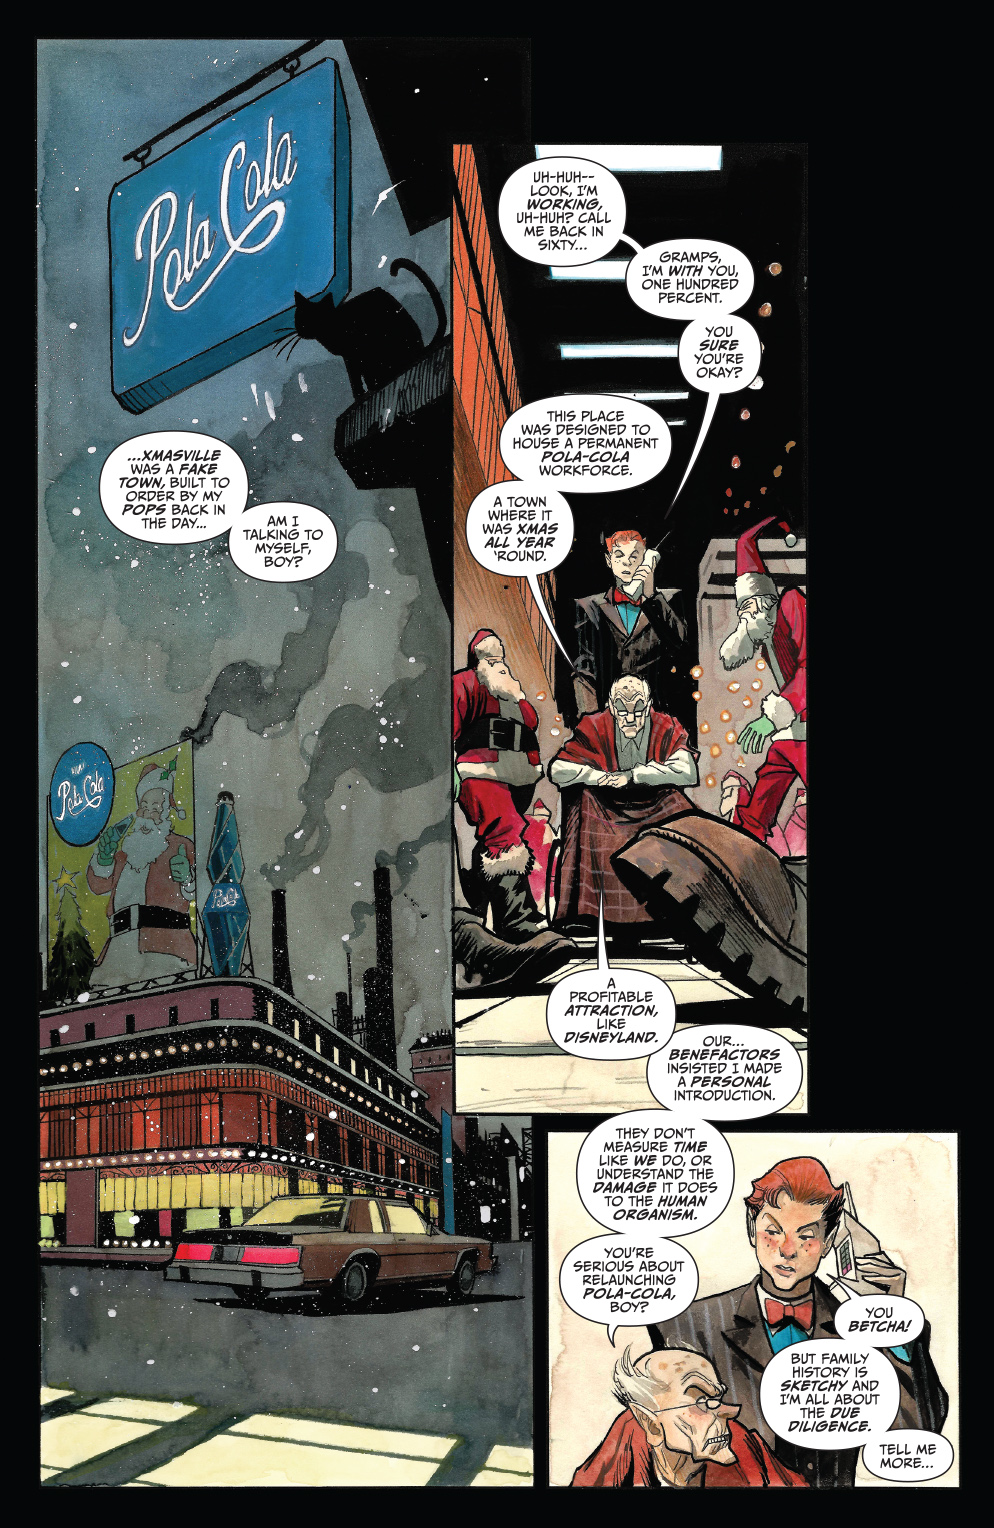 Klaus_Crisis_in_Xmasville_001_Preview_5